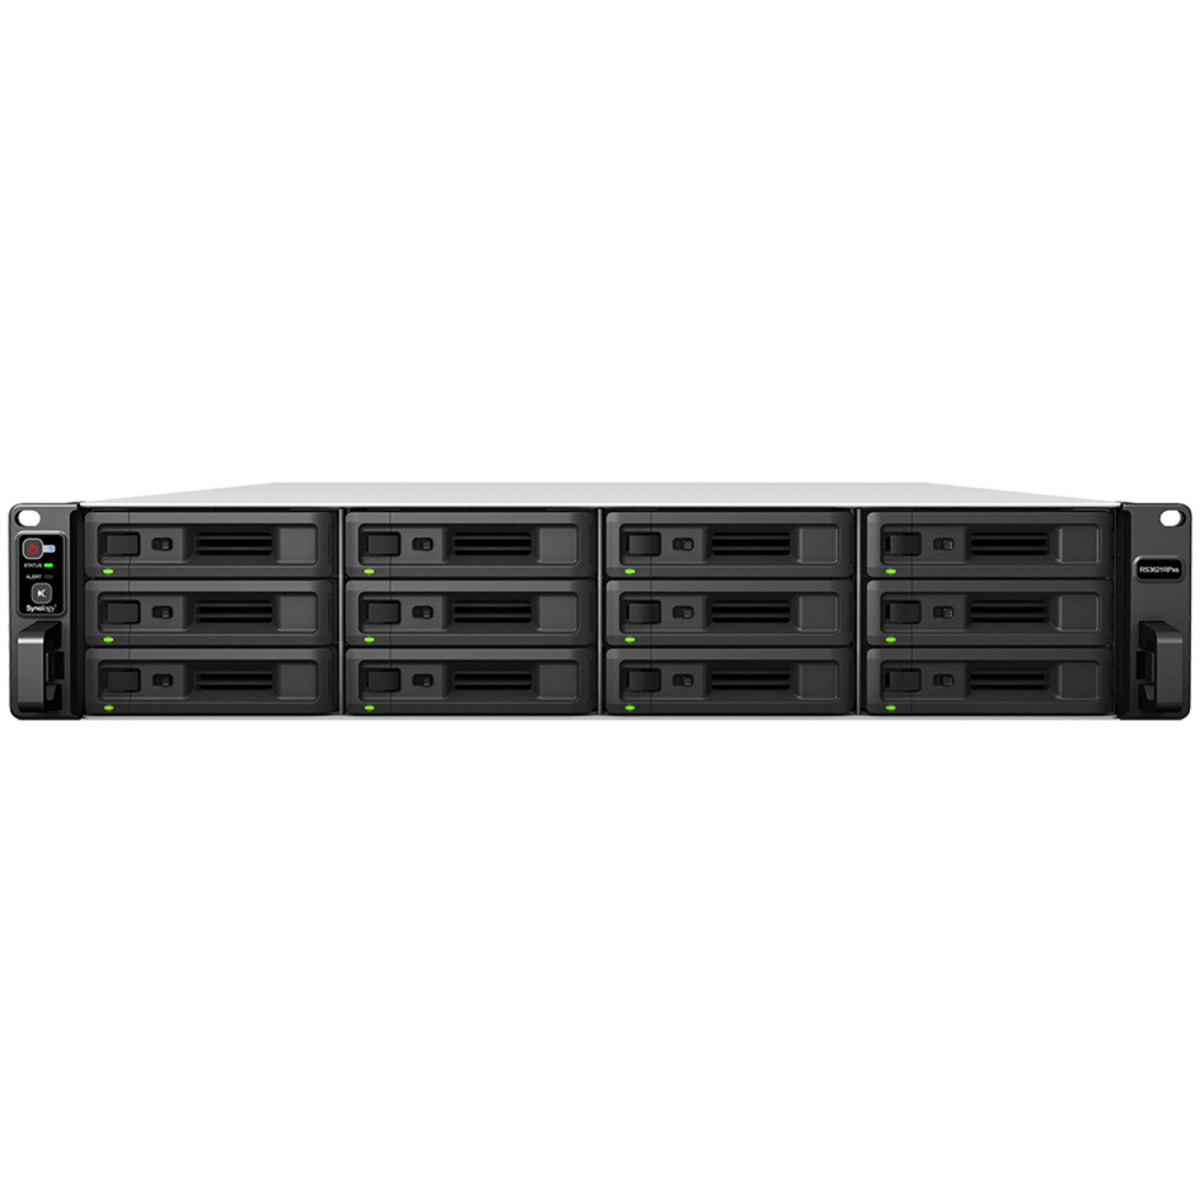 buy $5979 Synology RackStation RS3621RPxs 72tb RackMount NAS - Network Attached Storage Device 12x6000gb Western Digital Blue WD60EZAZ 3.5 5400rpm SATA 6Gb/s HDD CONSUMER Class Drives Installed - Burn-In Tested - nas headquarters buy network attached storage server device das new raid-5 free shipping usa christmas new year holiday sale RackStation RS3621RPxs